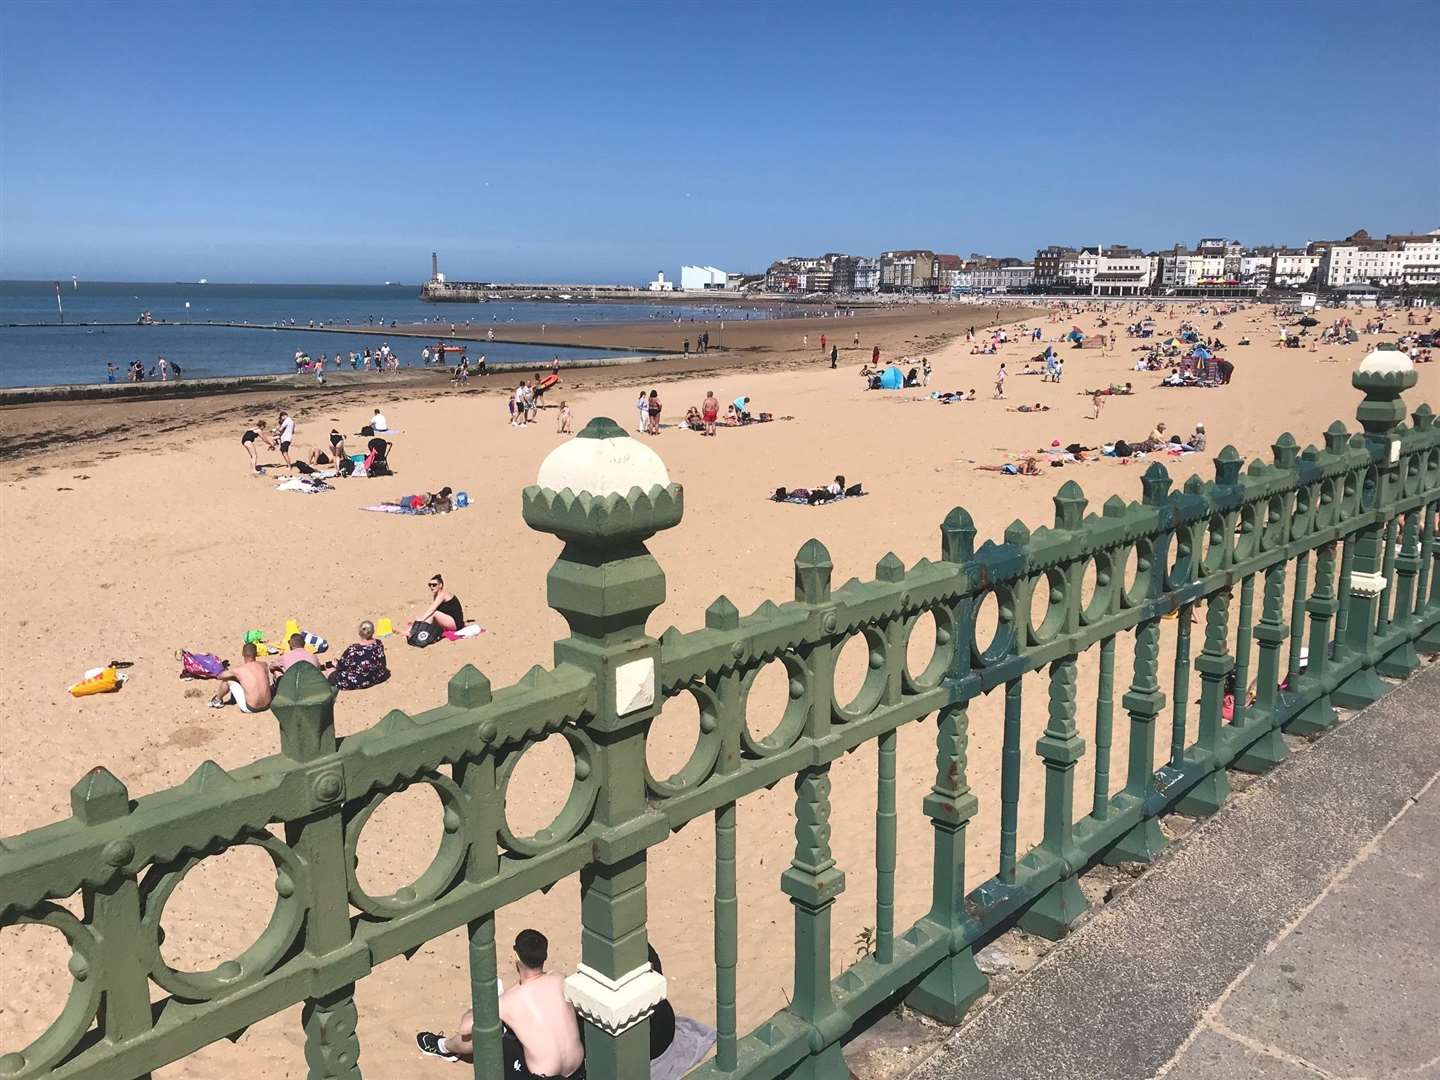 Margate has proved a popular location for a number of major TV and film shoots